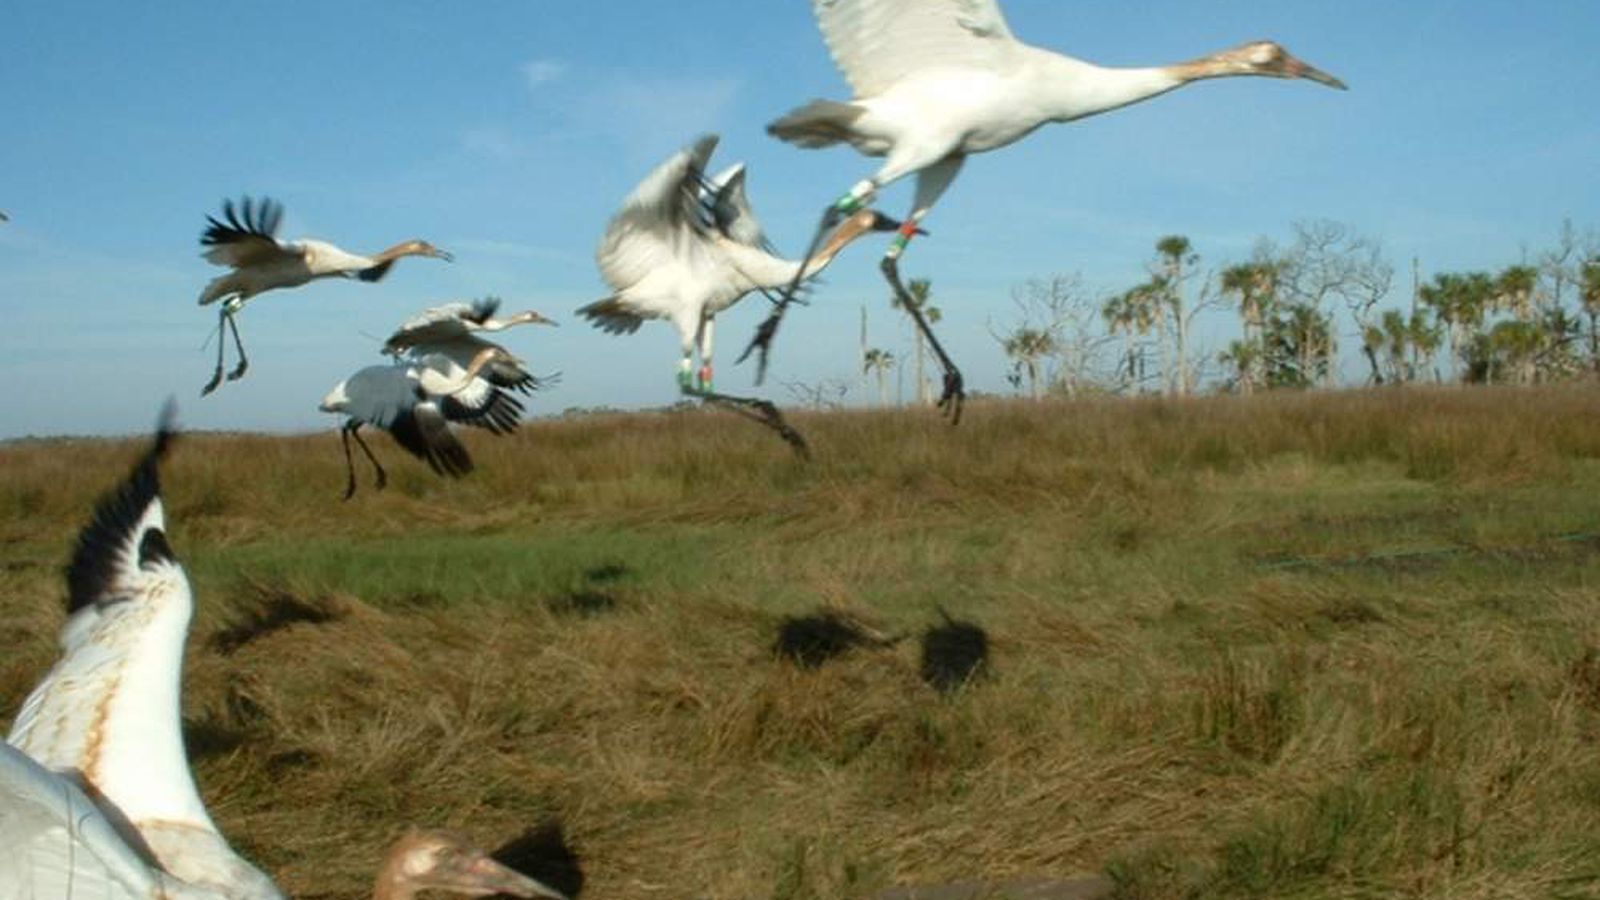 Whooping cranes didn't so well in Florida. Next stop: Louisiana